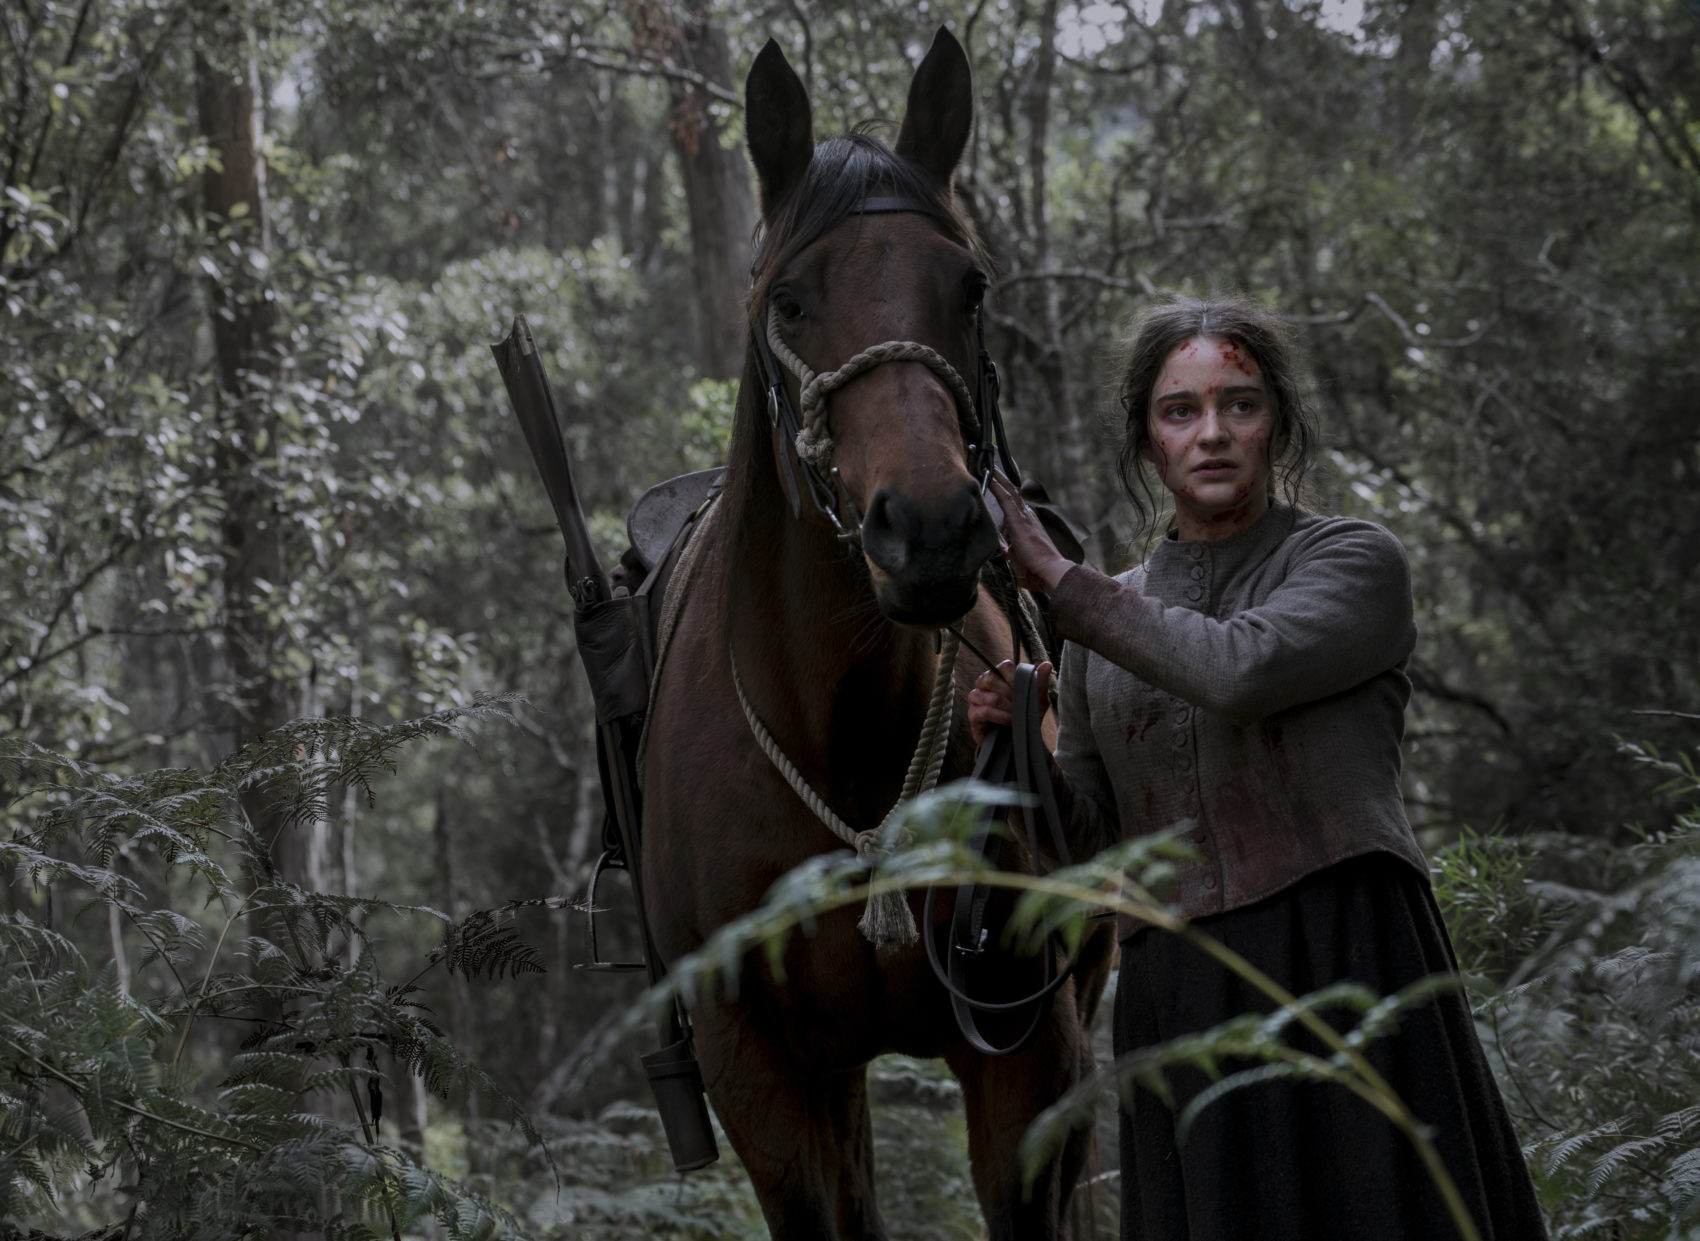 Aisling Franciosi stars as Clare in Jennifer Kent's &quot;The Nightingale.&quot; (Courtesy IFC Films)